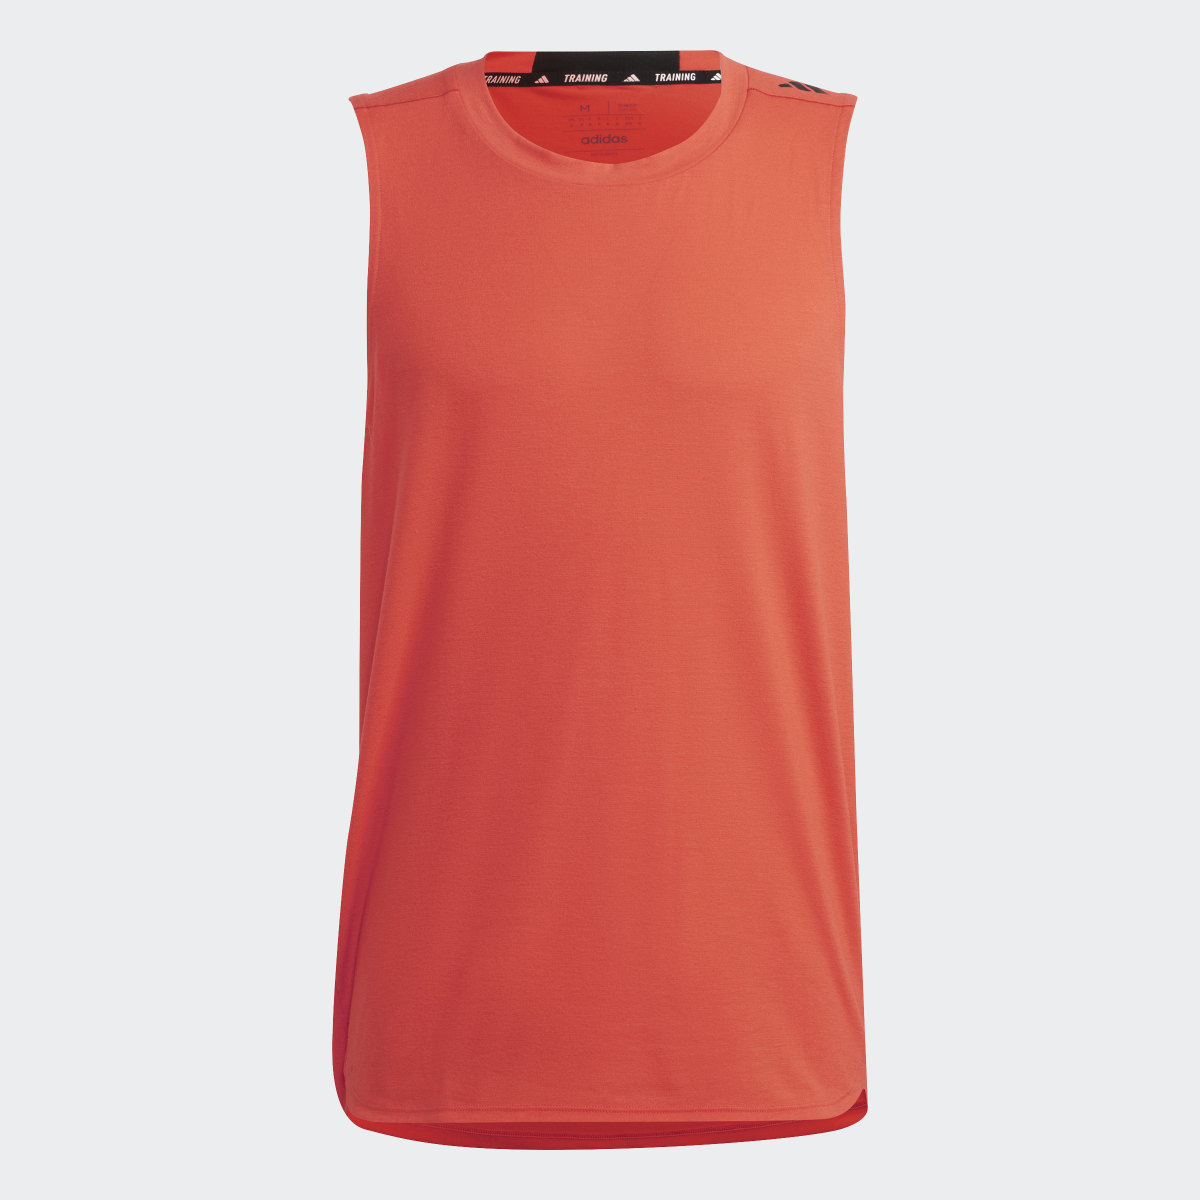 Adidas Designed for Training Workout Tank Top. 5